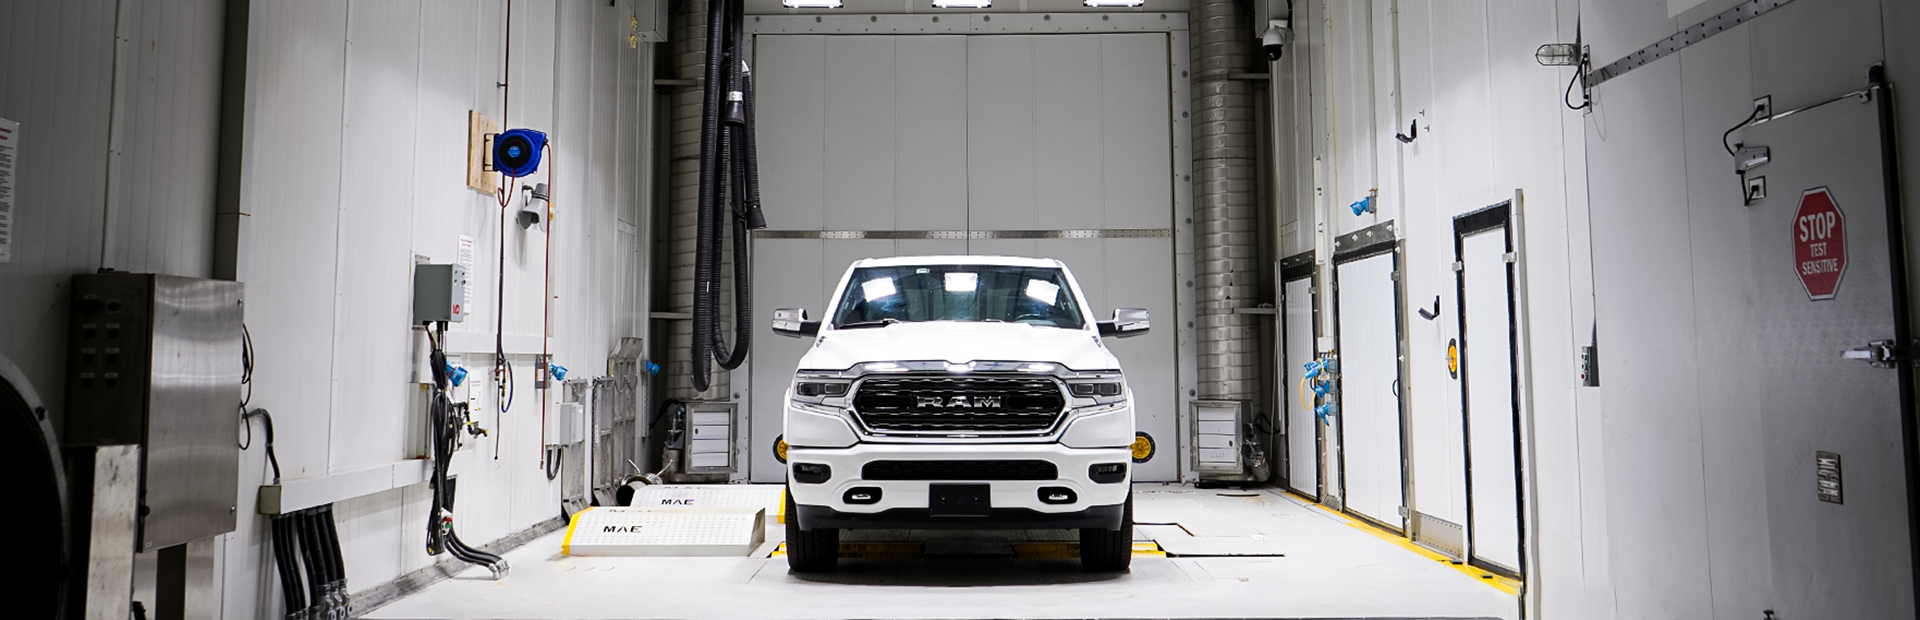 A white Dodge Ram is on the dyno under the solar array in the Large Climatic Chamber (LCC).